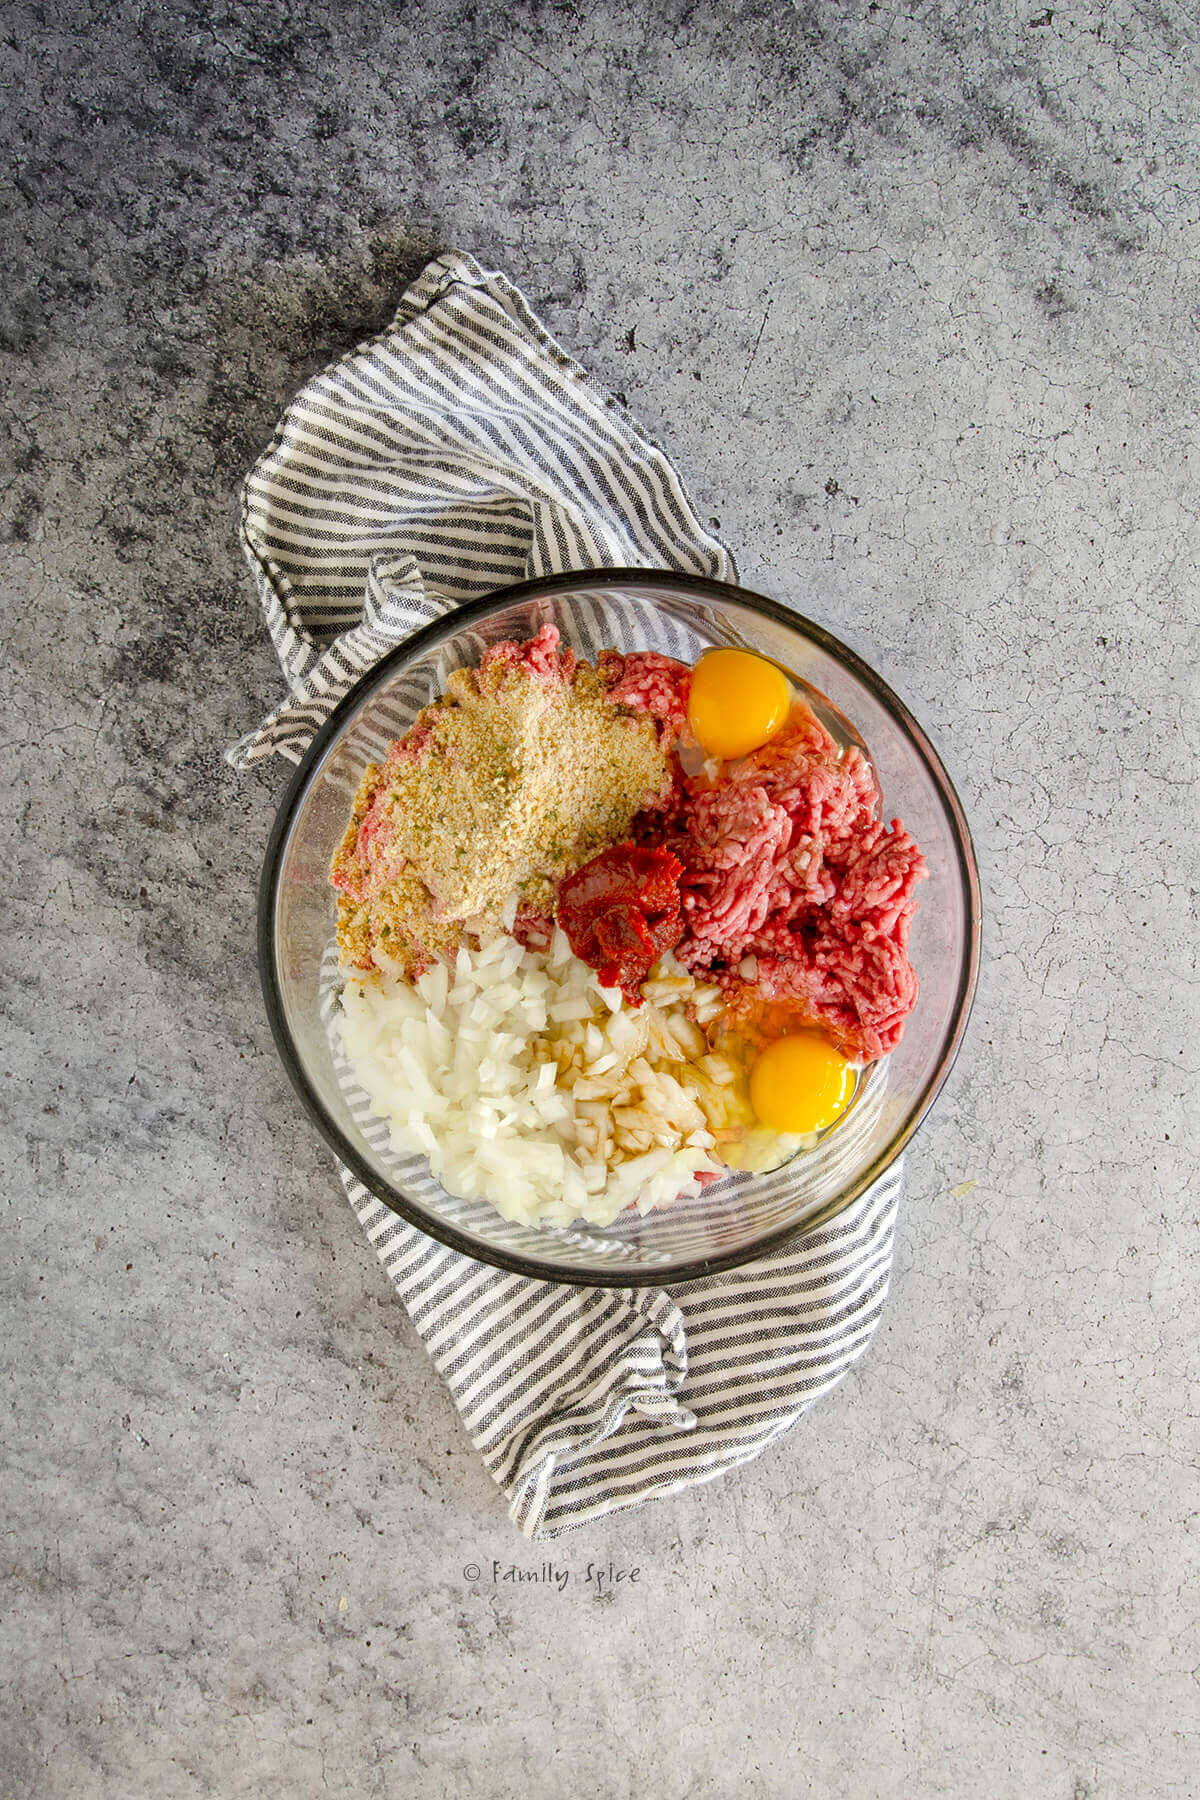 A glass mixing bowl with ingredients added to make meatloaf